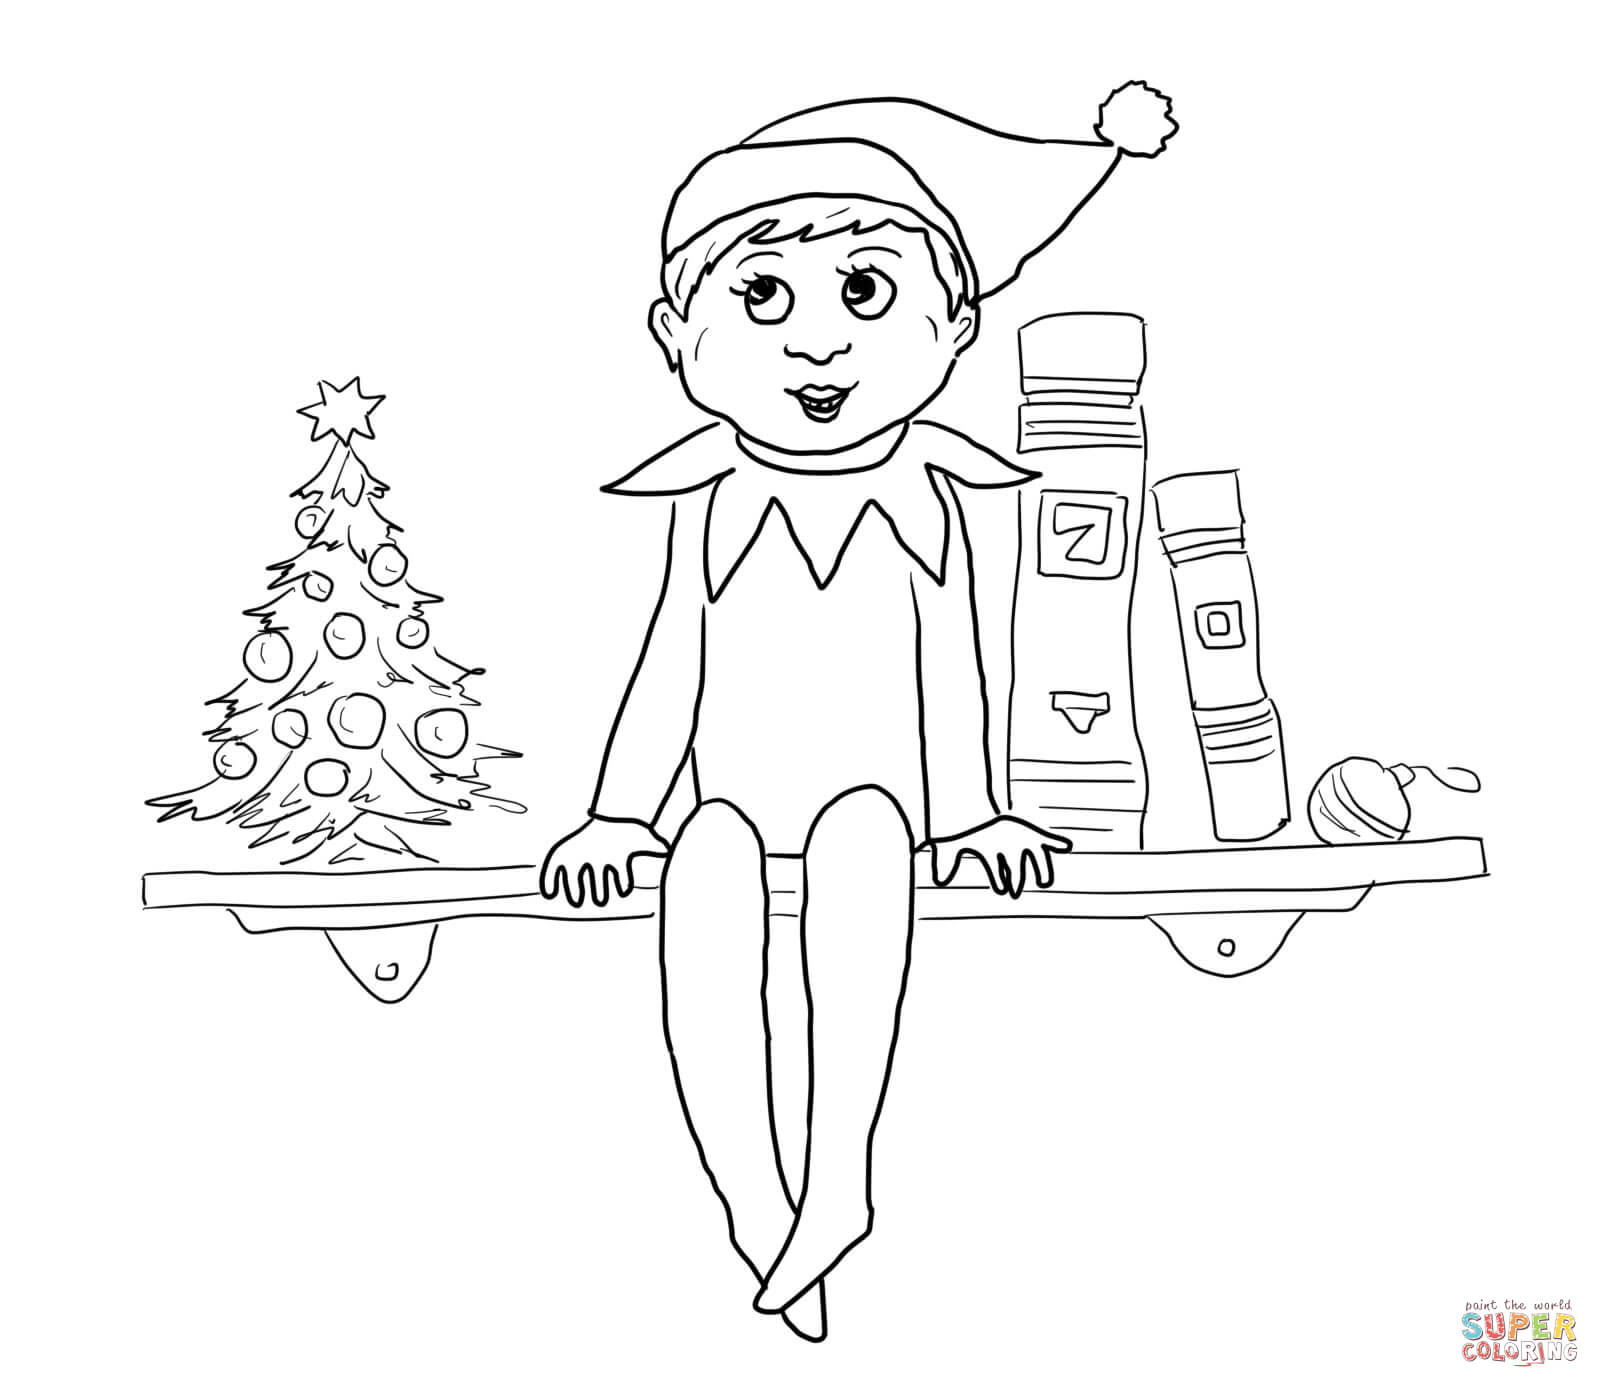 Christmas Coloring Pages Elf On The Shelf And Reindeer - Coloring Home